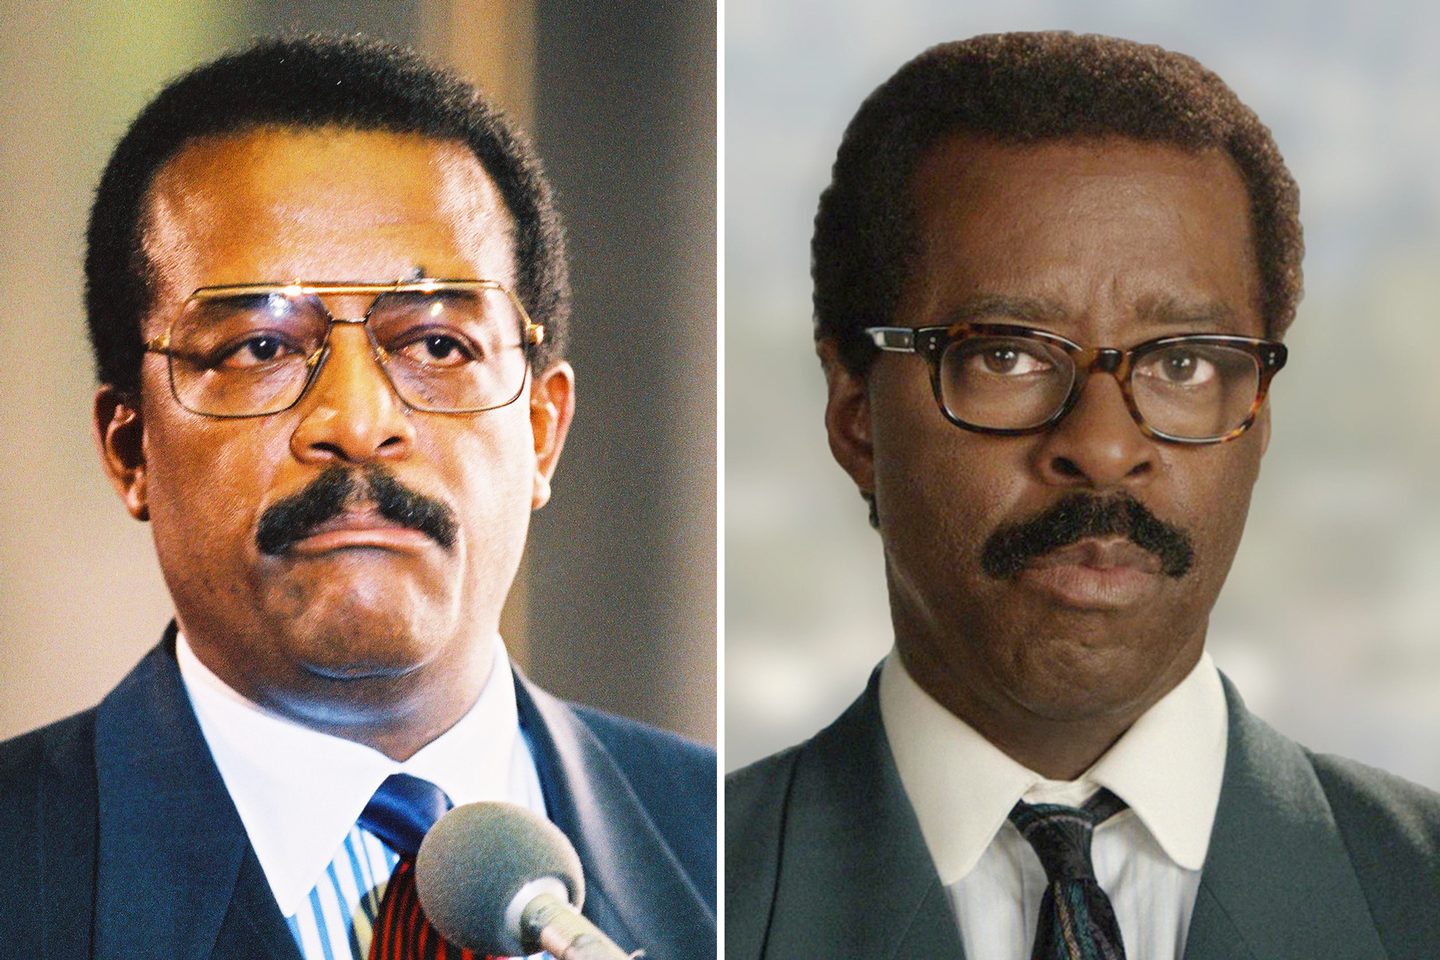 Who played Johnnie Cochran in The People vs OJ Simpson?